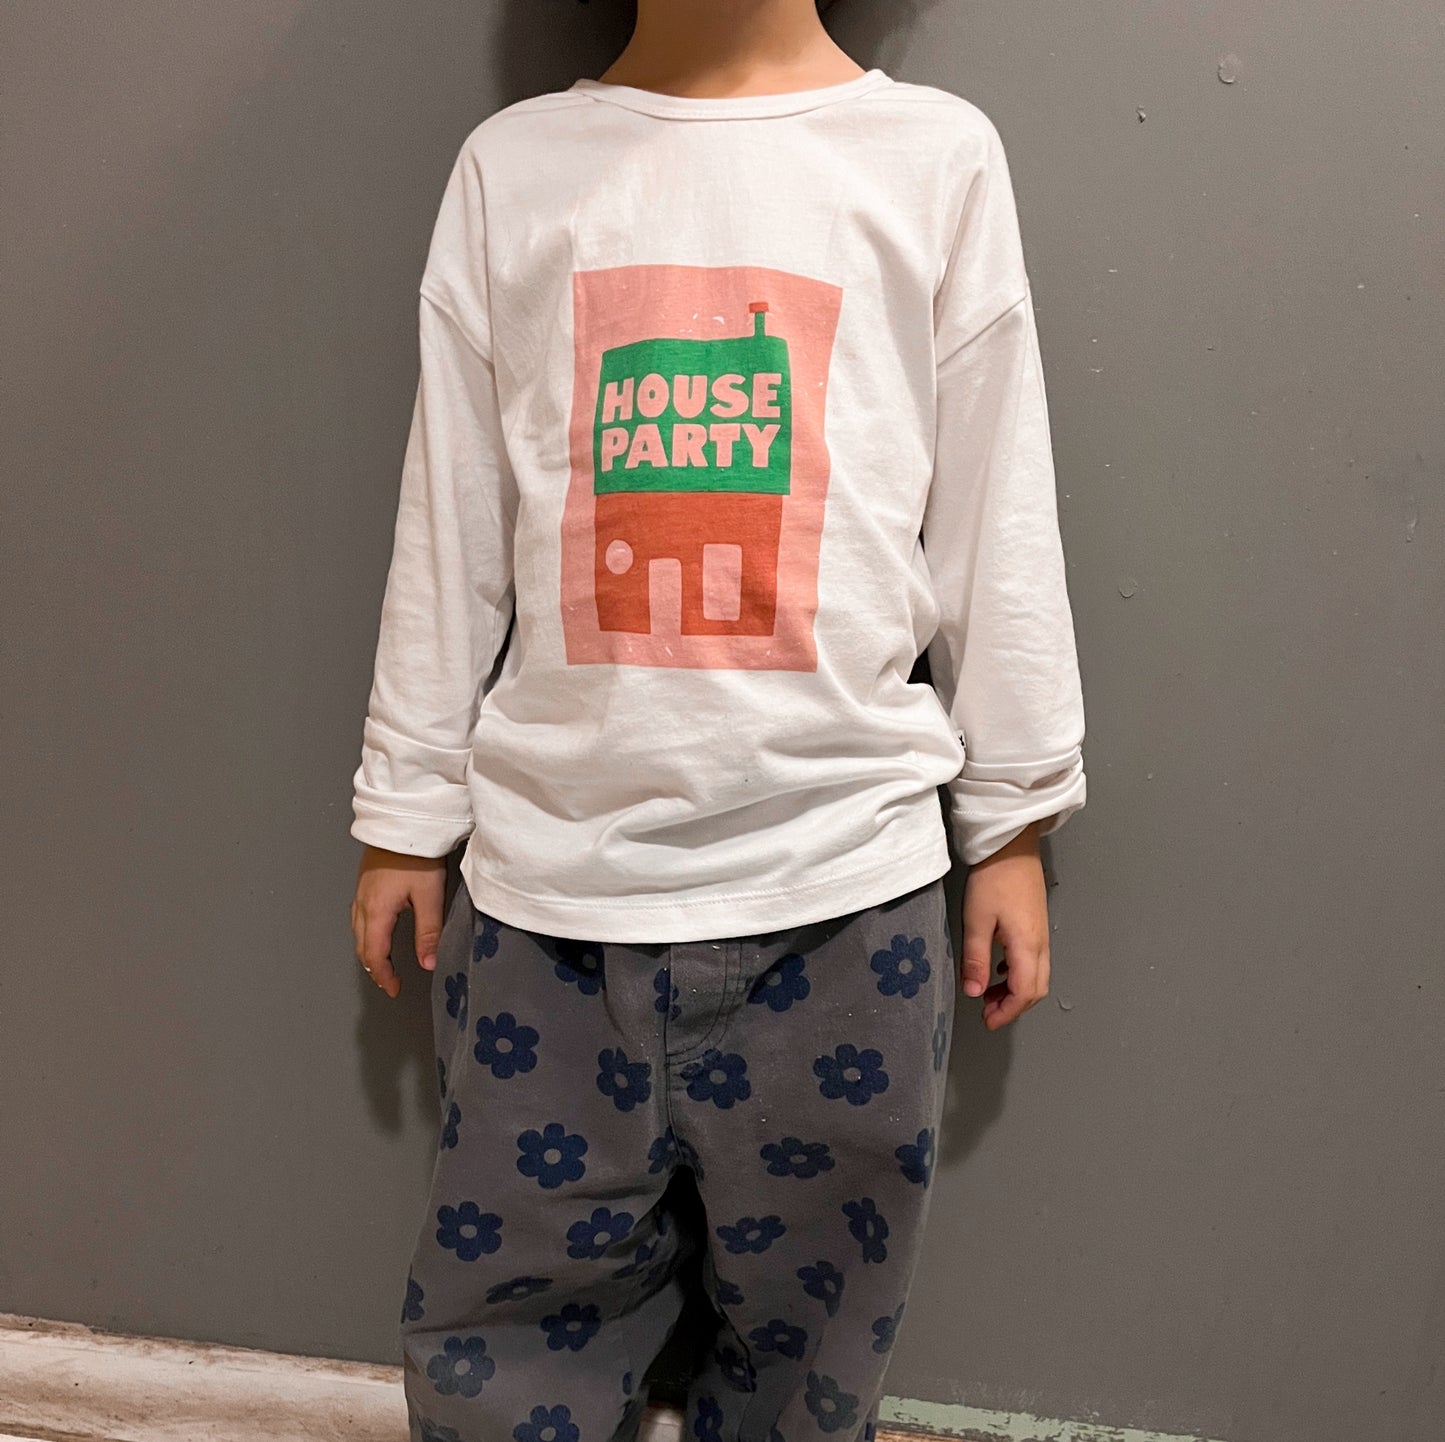 House Party Tee